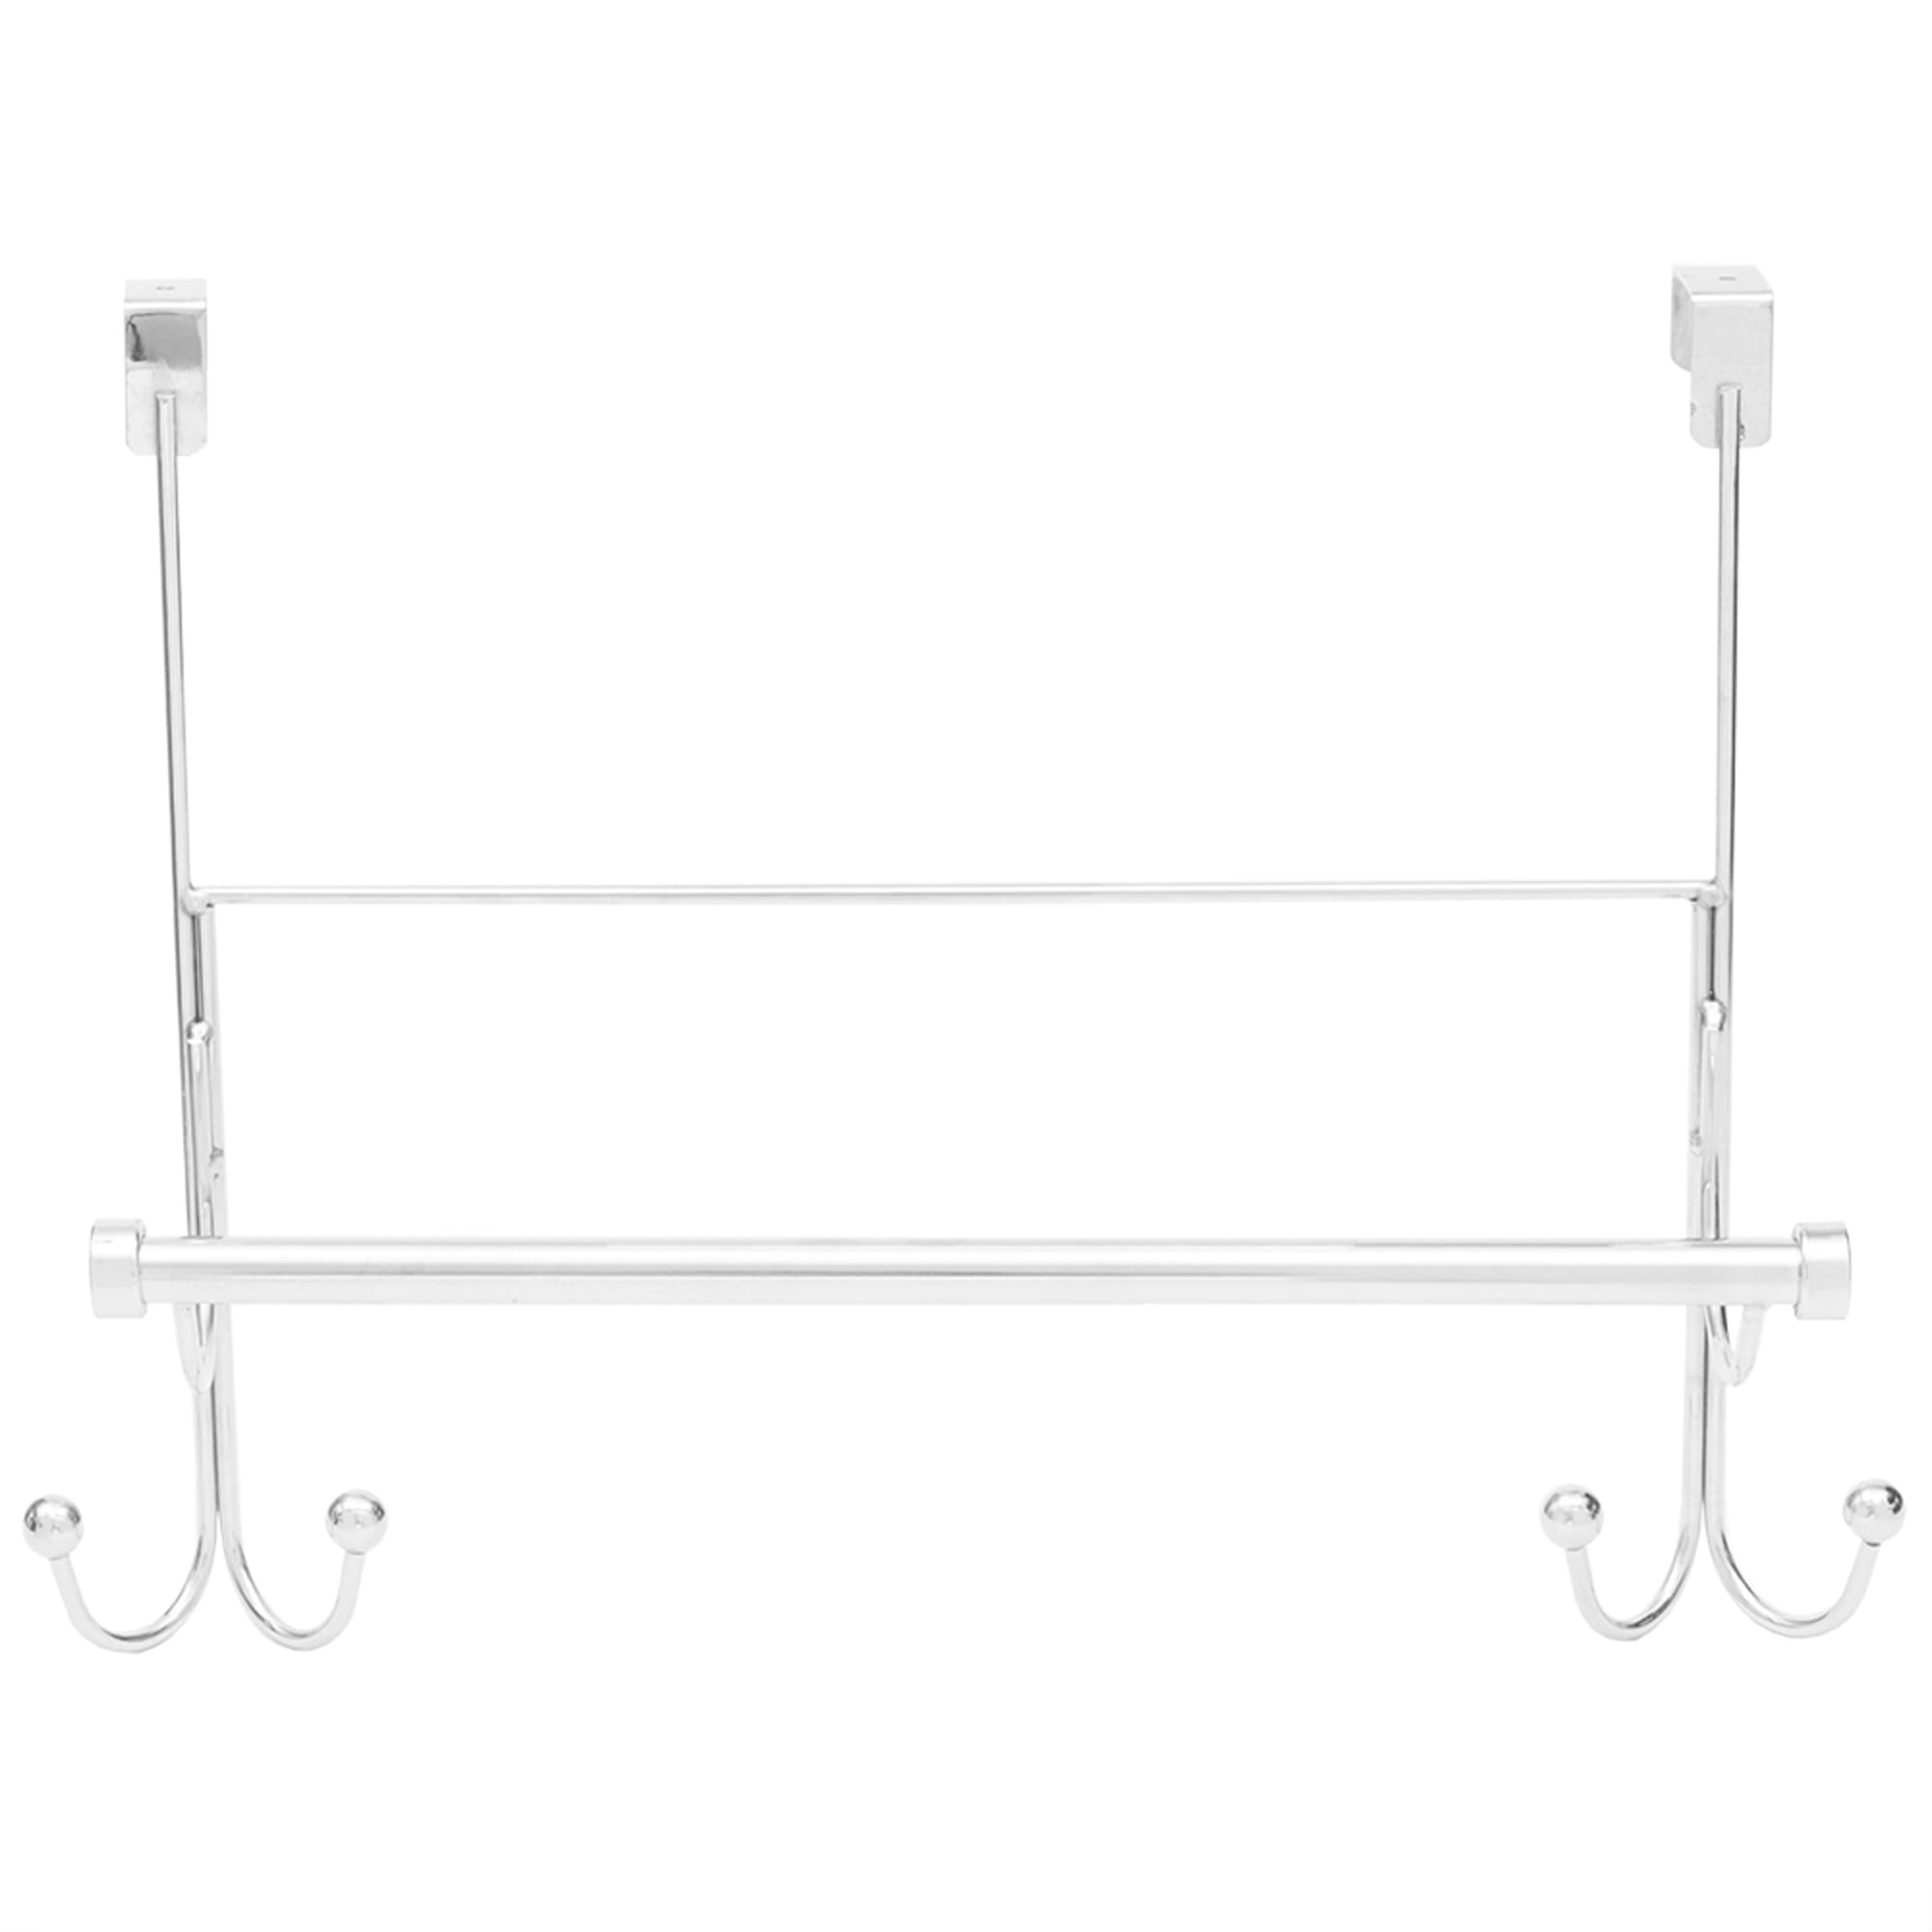 Home Basics Over the Door Hook with Towel Bar, Chrome $10.00 EACH, CASE PACK OF 8